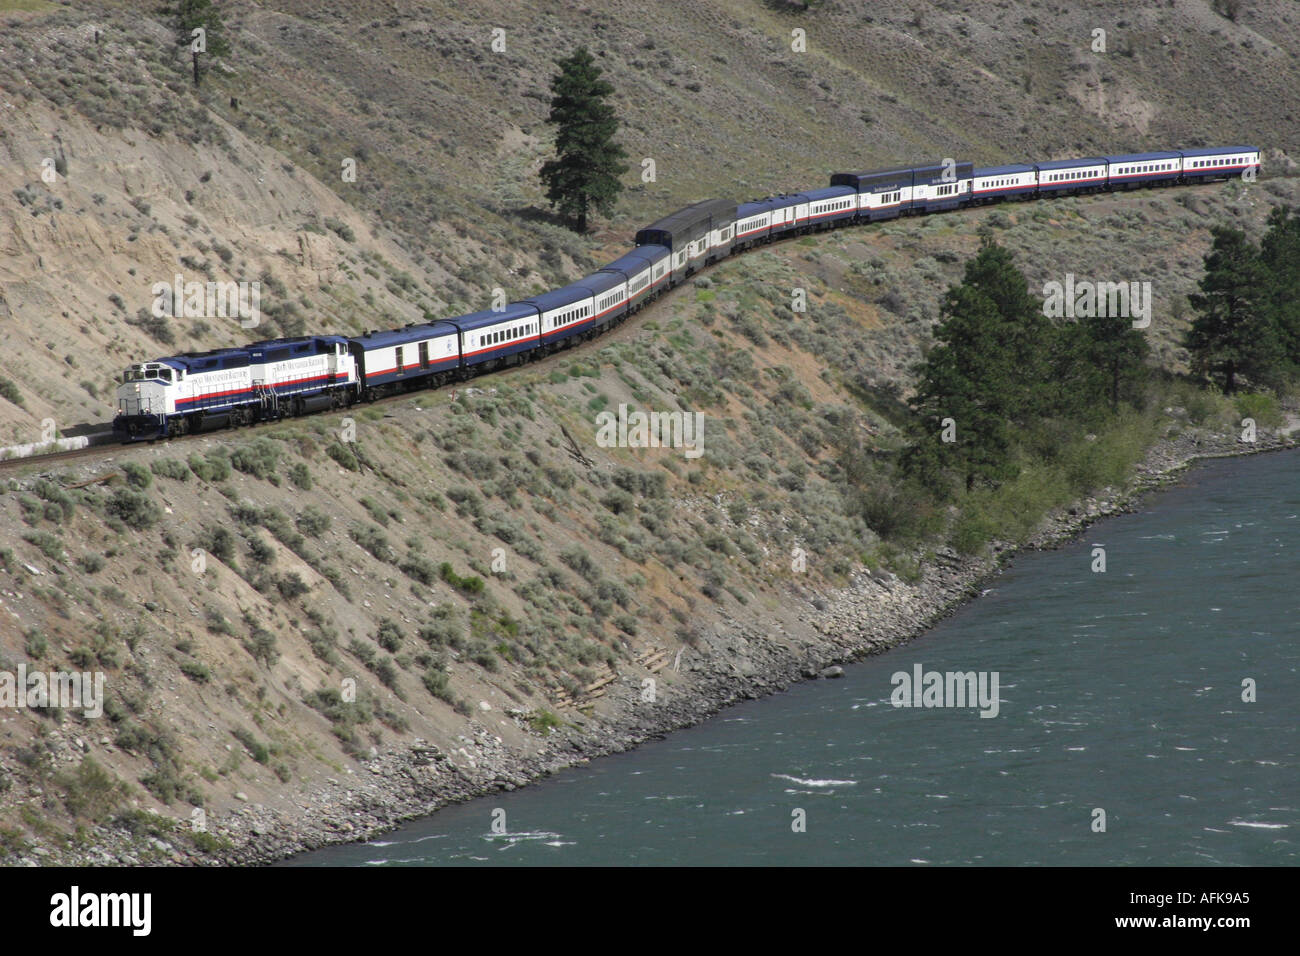 Rocky Mountaineer Railtours Train traveling by the Thompson River near Spencers Bridge in British Columbia Canada Stock Photo